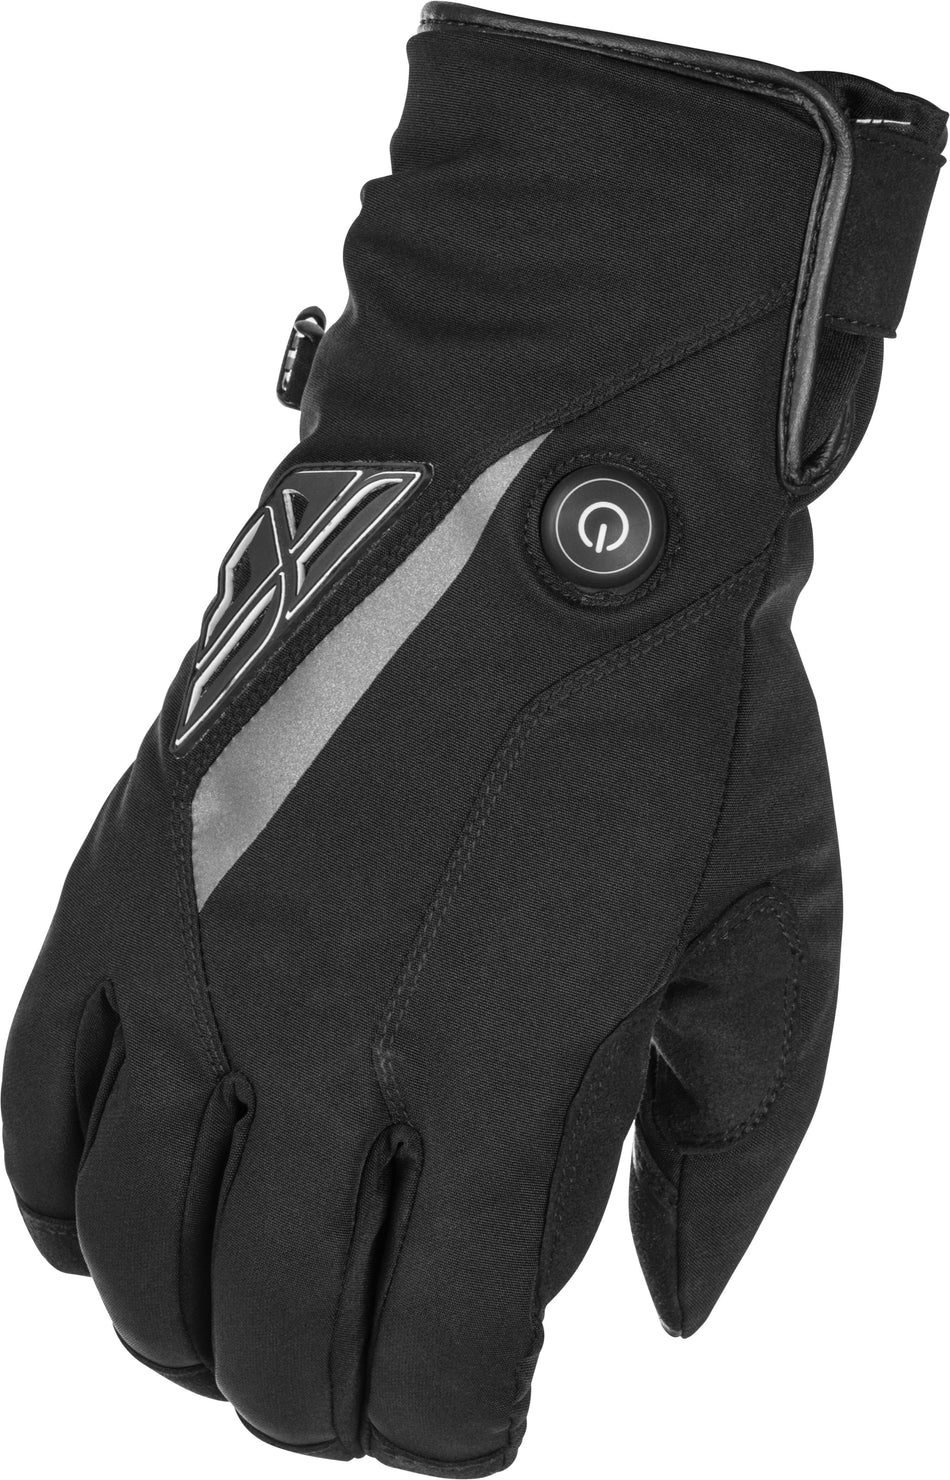 FLY RACING Title Heated Gloves Black 4x 476-29304X